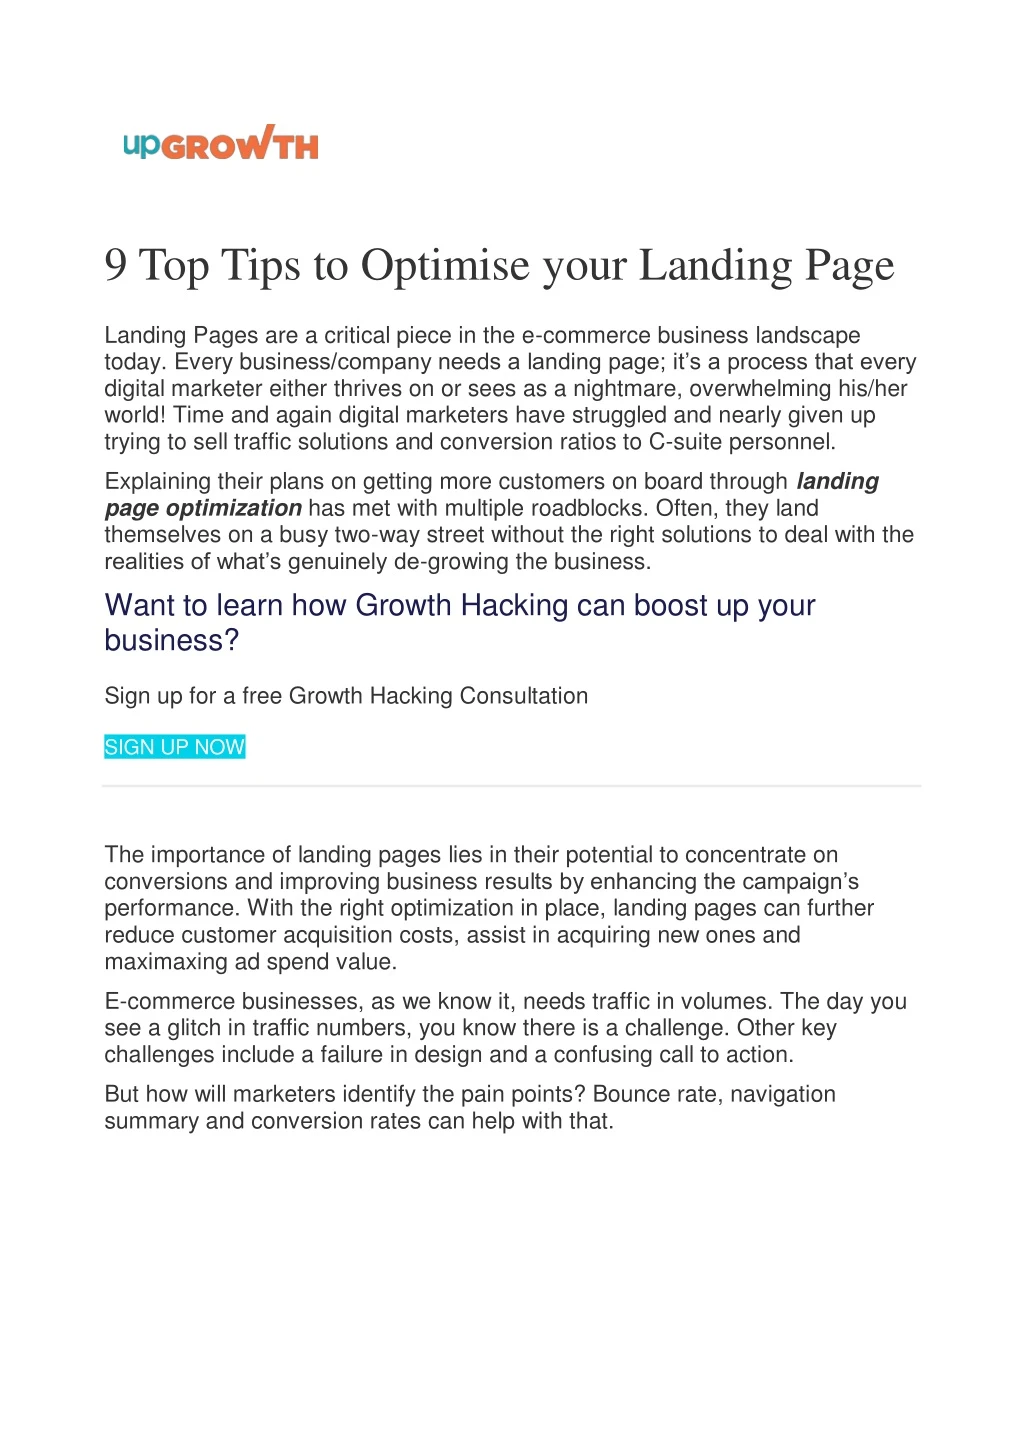 9 top tips to optimise your landing page